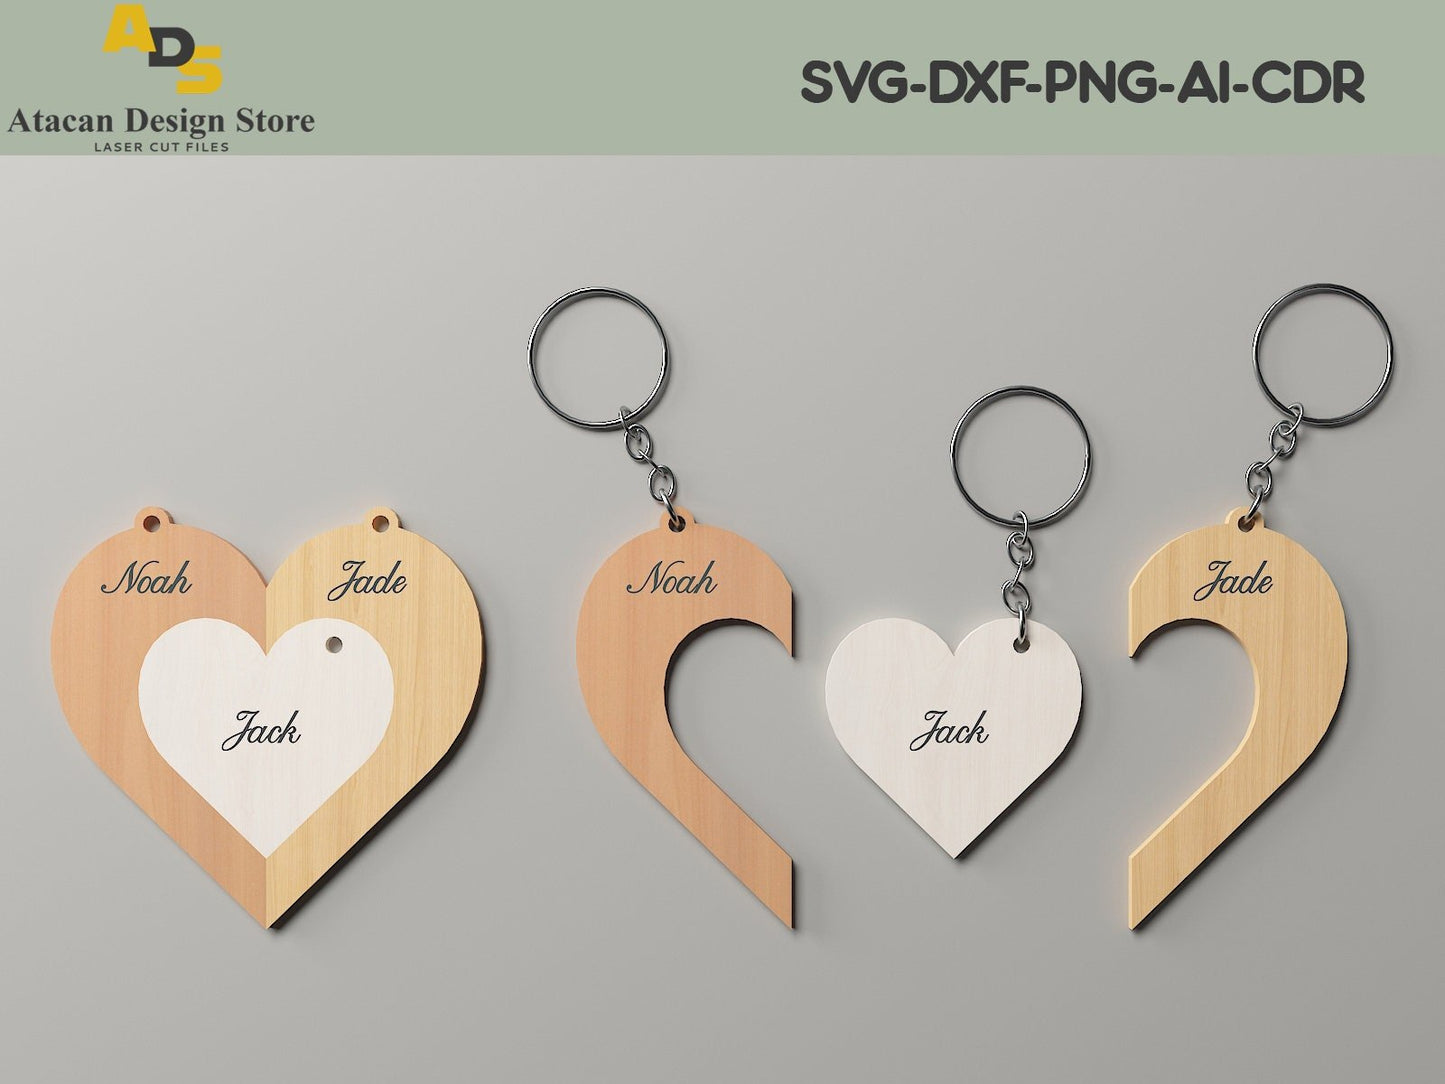 The Hearts of Our Family Key Chain cut Files / Laser Cut Personalized Cute Keychains / Key Fob Templates 264